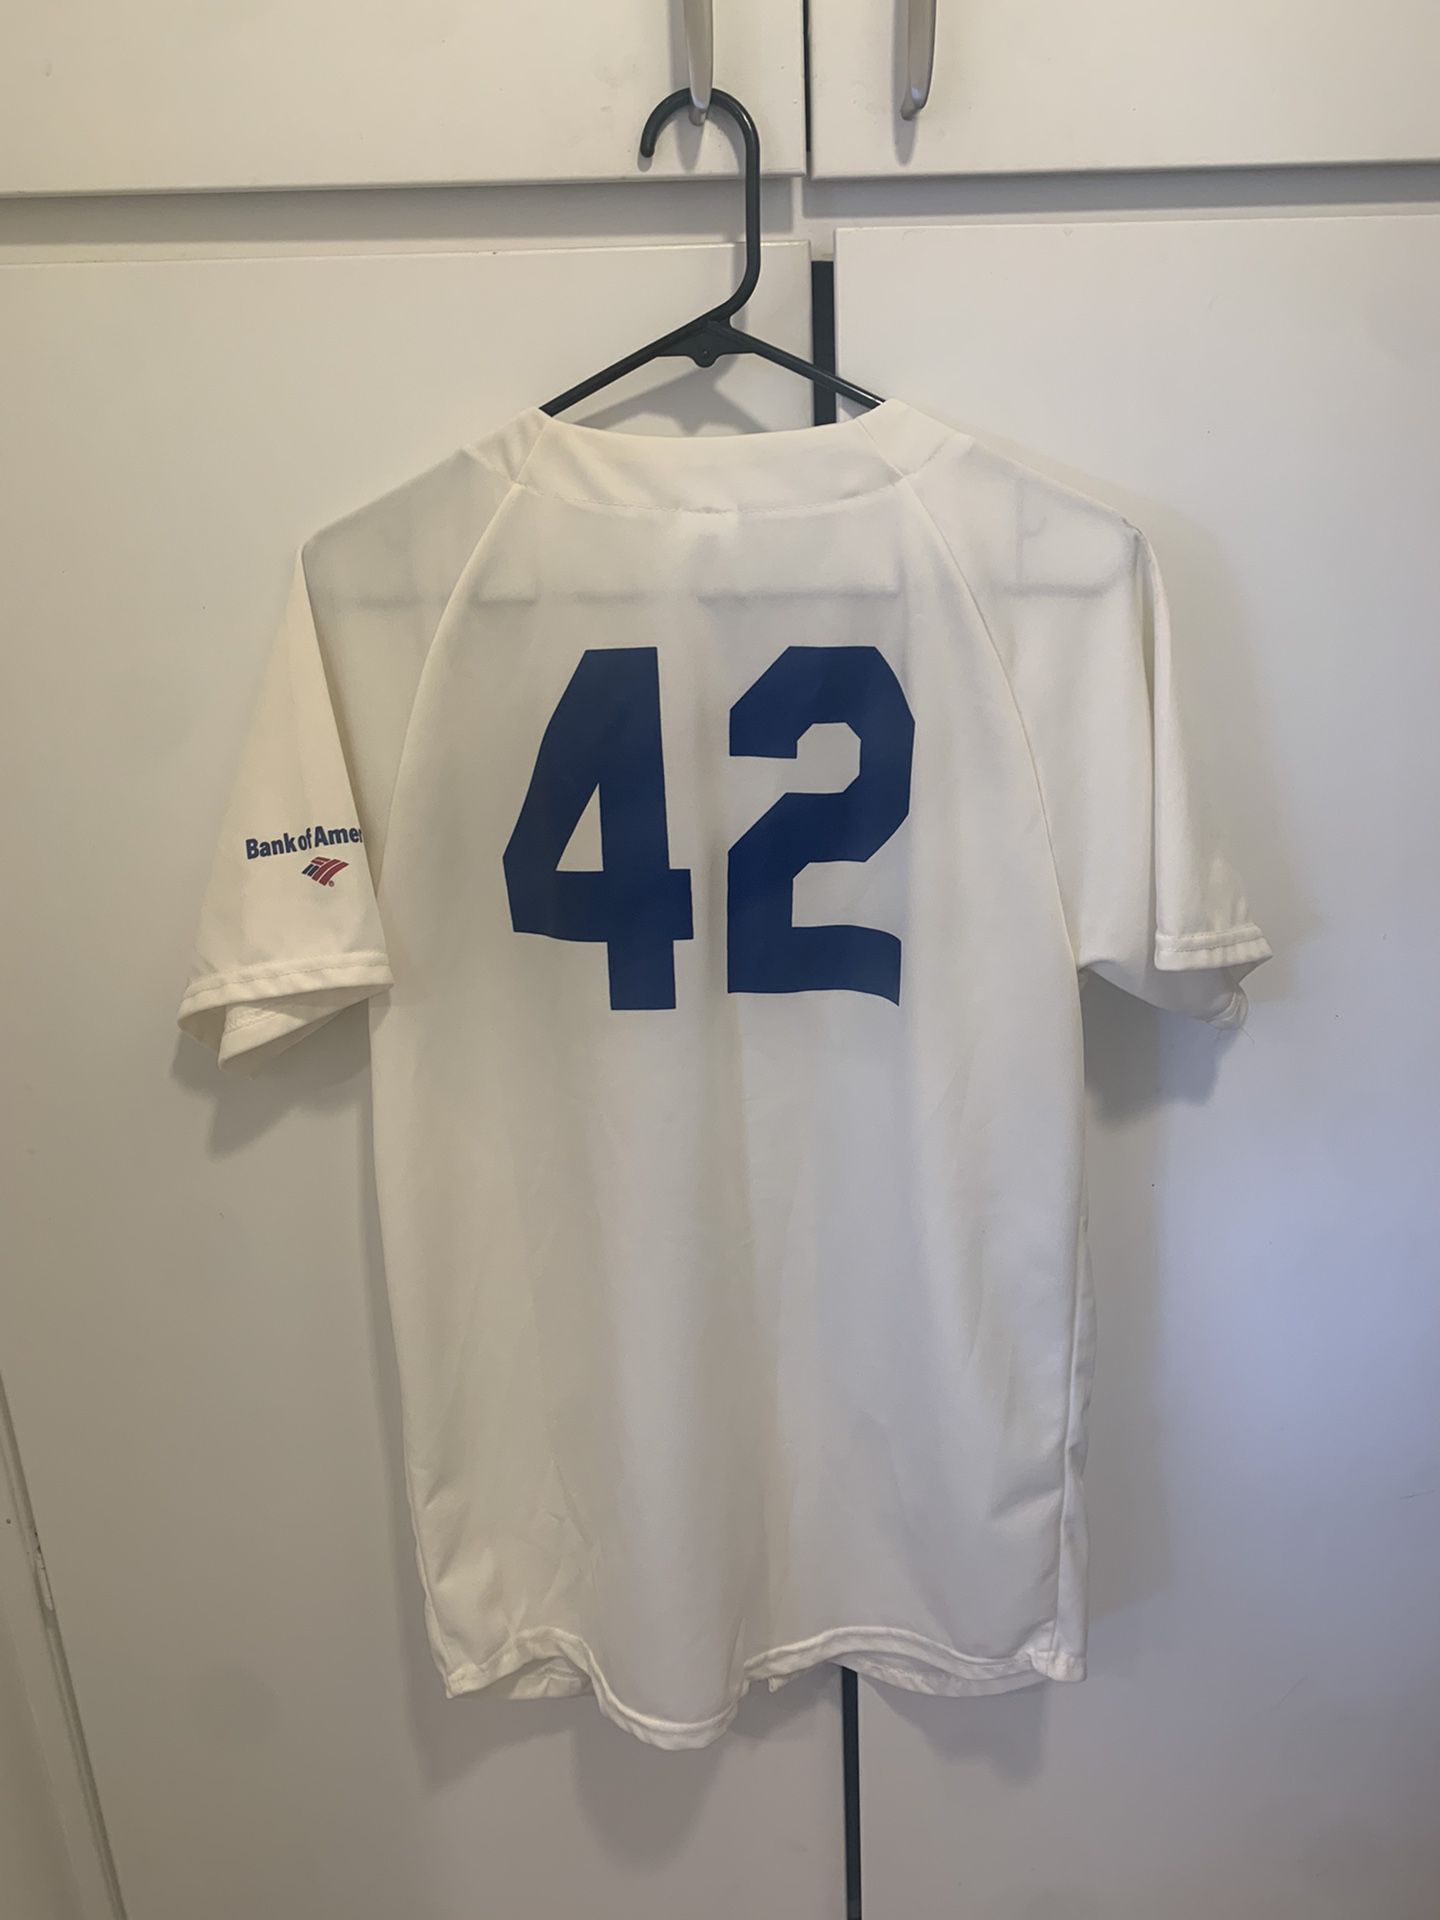 Brooklyn Dodgers Jackie Robinson 42 1955 Bank of America White Jersey